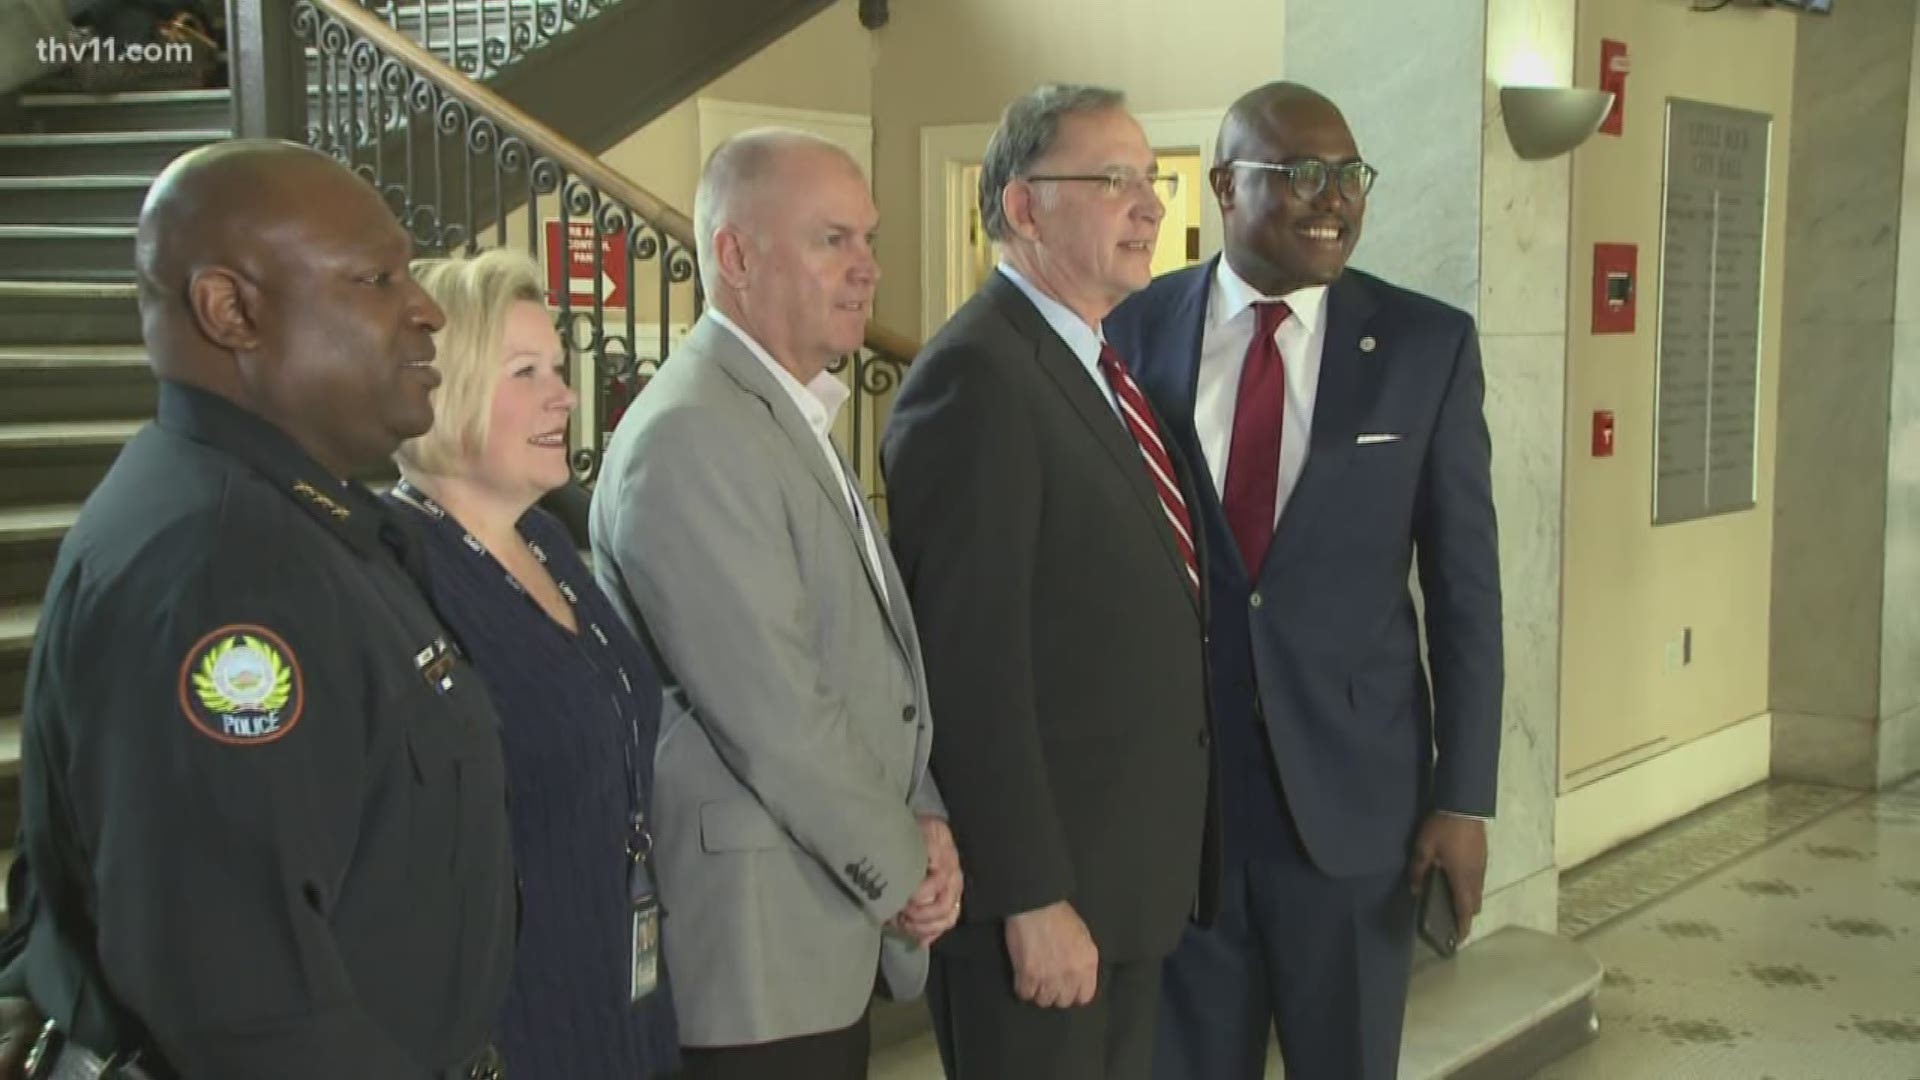 Senator John Boozman met with Little Rock Mayor Frank Scott and Interim Chief of Police Wayne Bewley to learn about how crime is being addressed in the city.